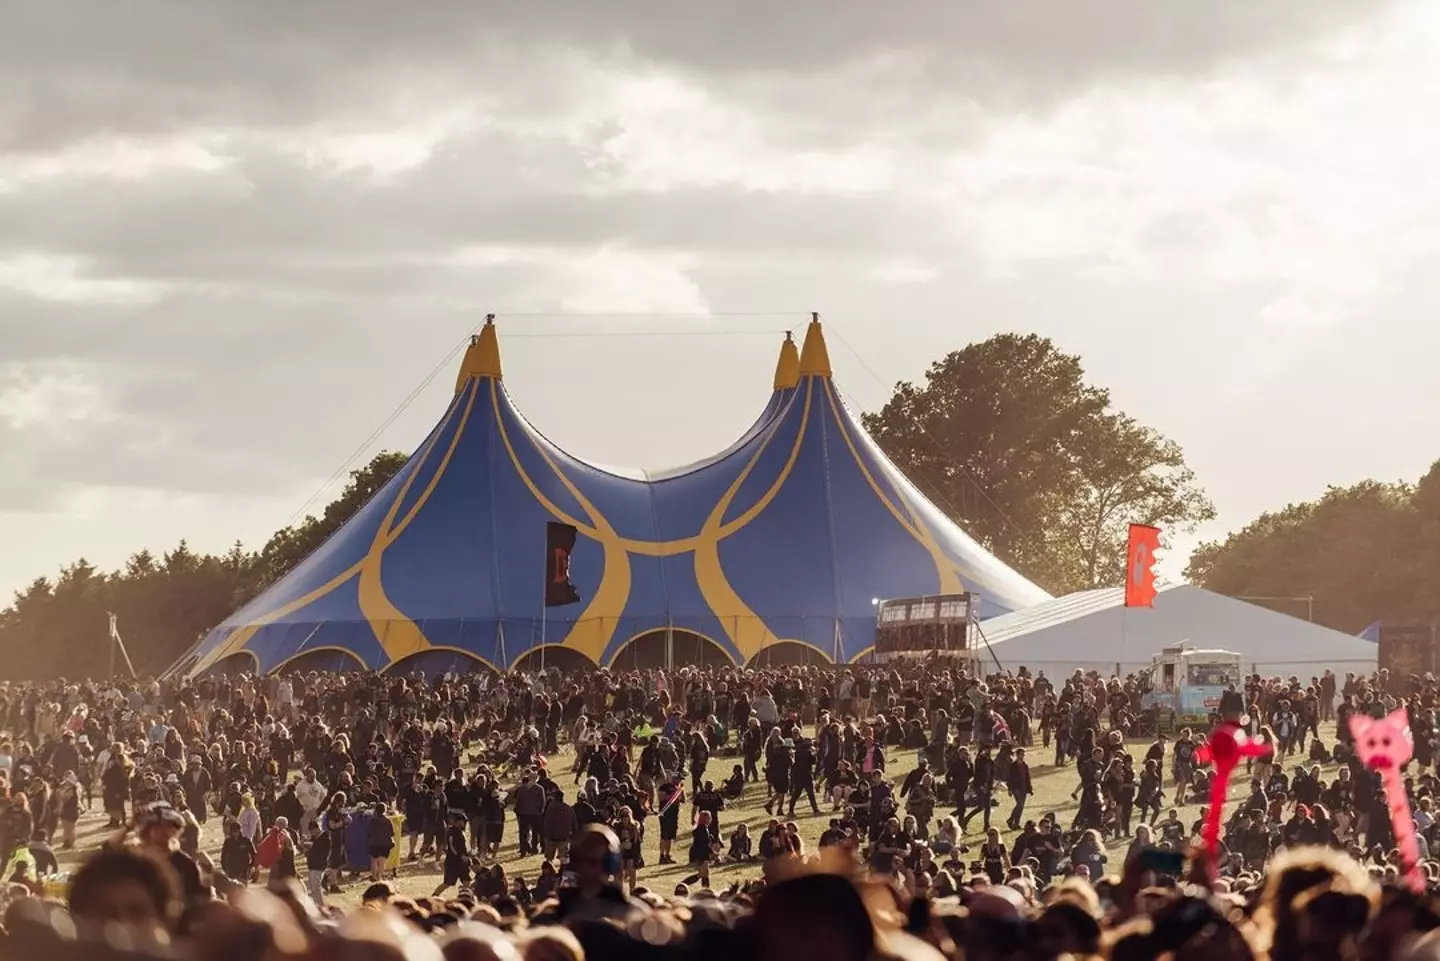 The Arena at Download Festival.